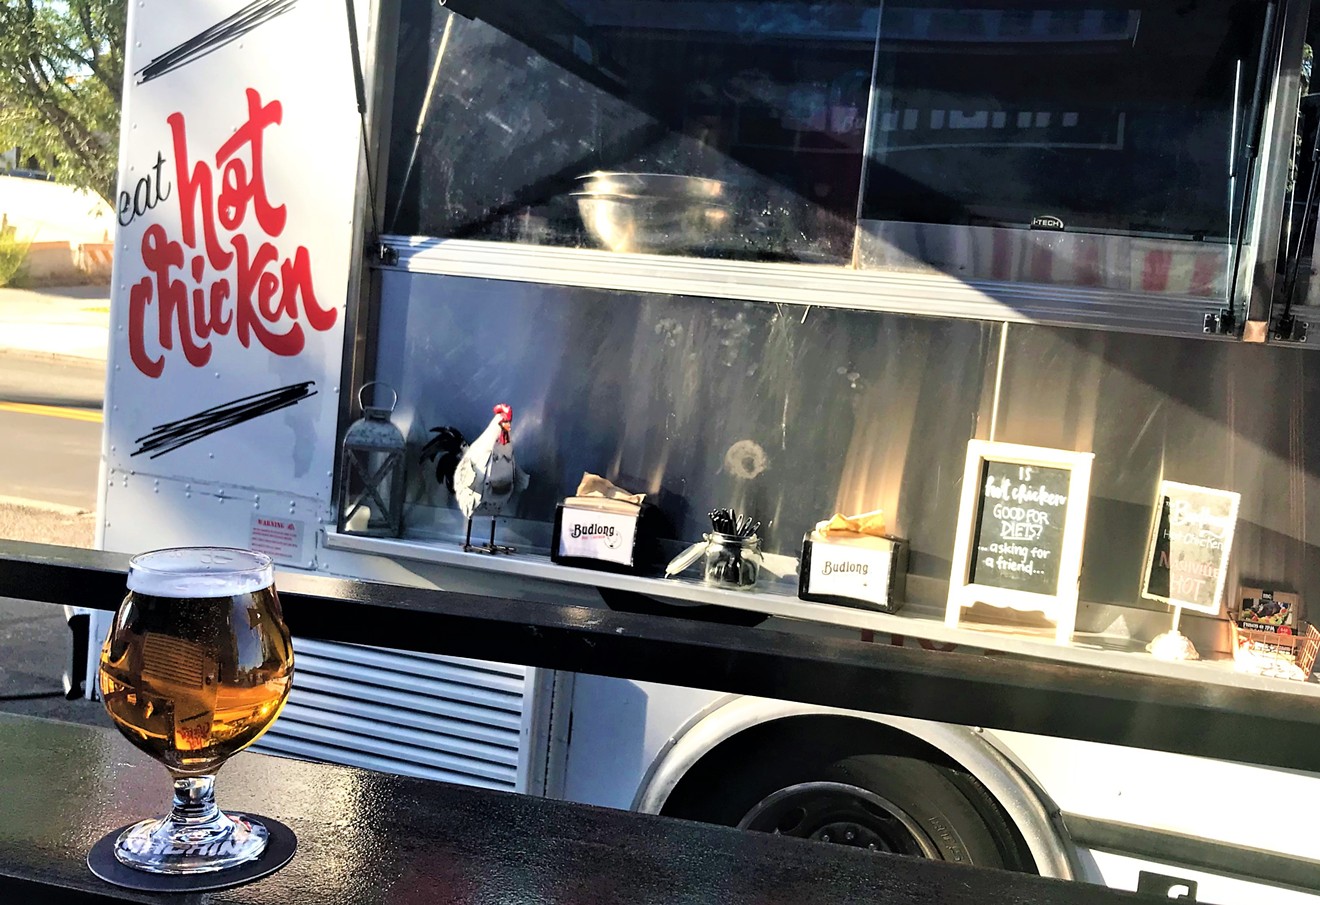 The Budlong Hot Chicken Truck  makes the rounds at breweries.